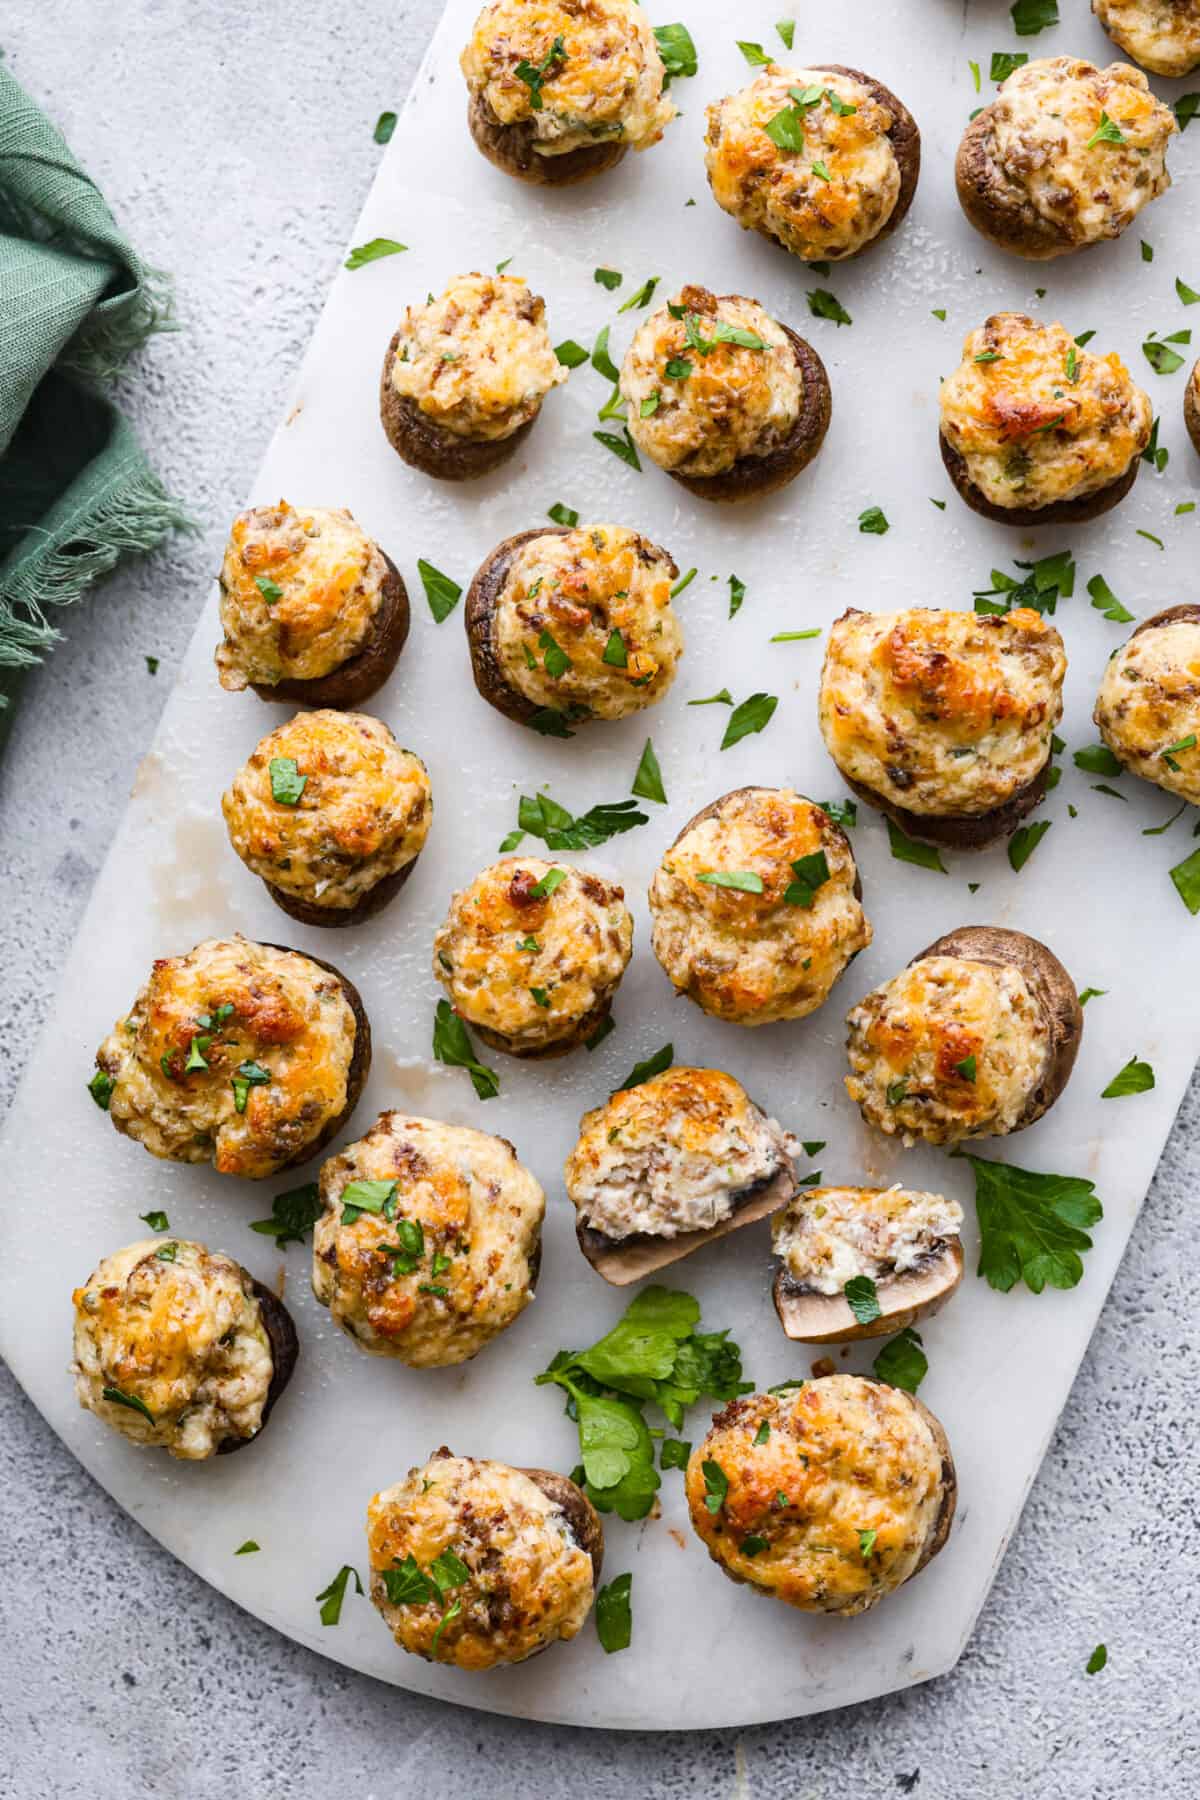 Top-down view of sausage stuffed mushrooms on a serving platter.